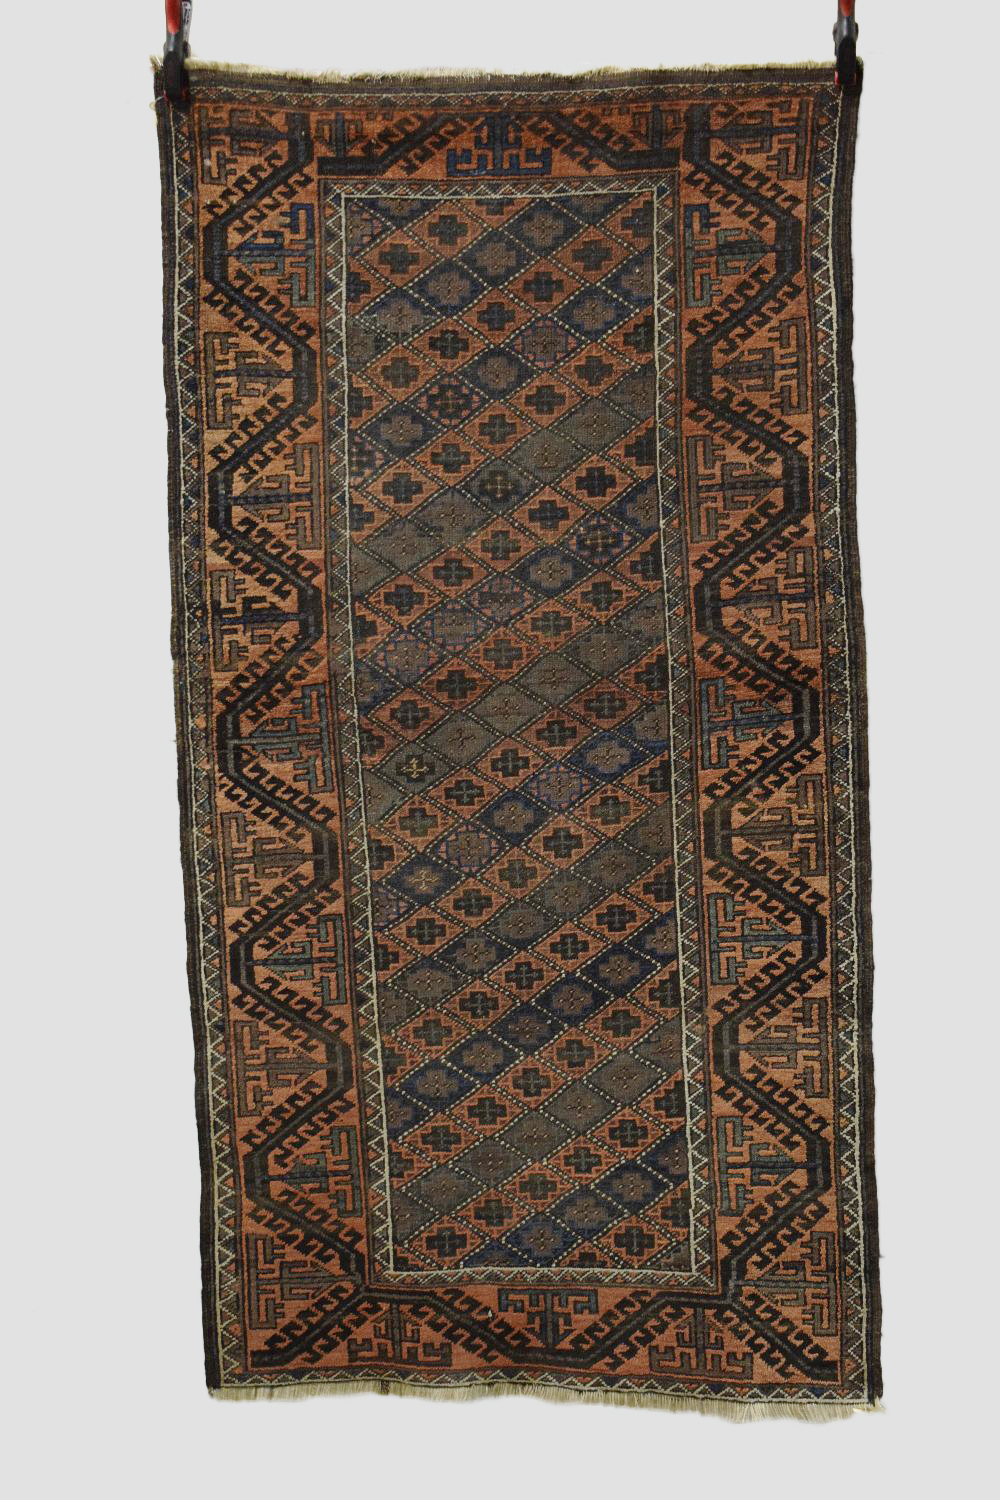 Two Baluchi rugs, Khorasan, north east Persia, the first a long rug of lattice design, early 20th